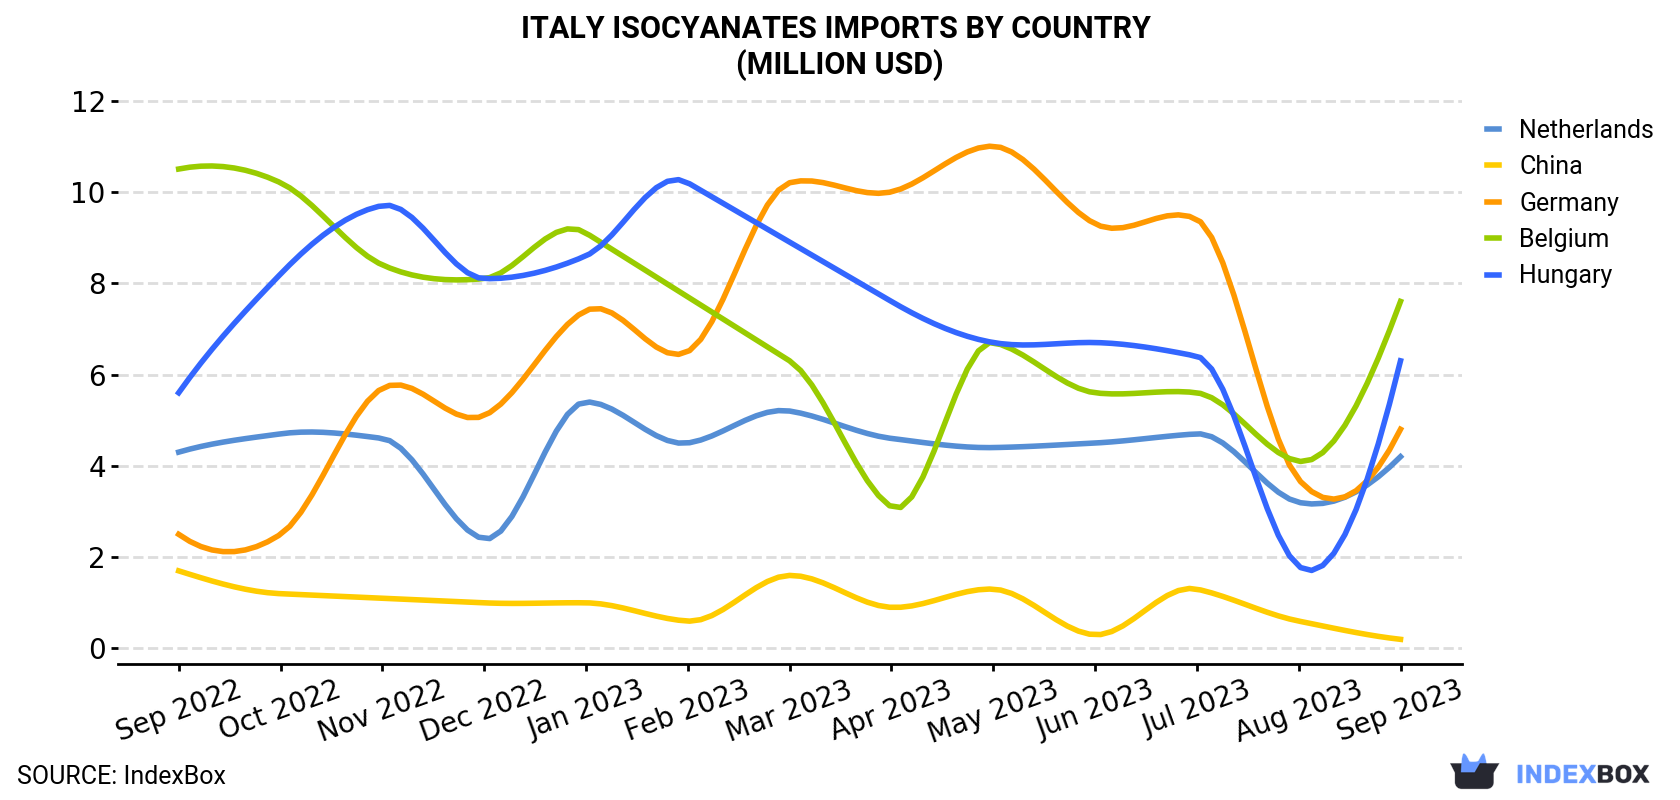 Italy Isocyanates Imports By Country (Million USD)